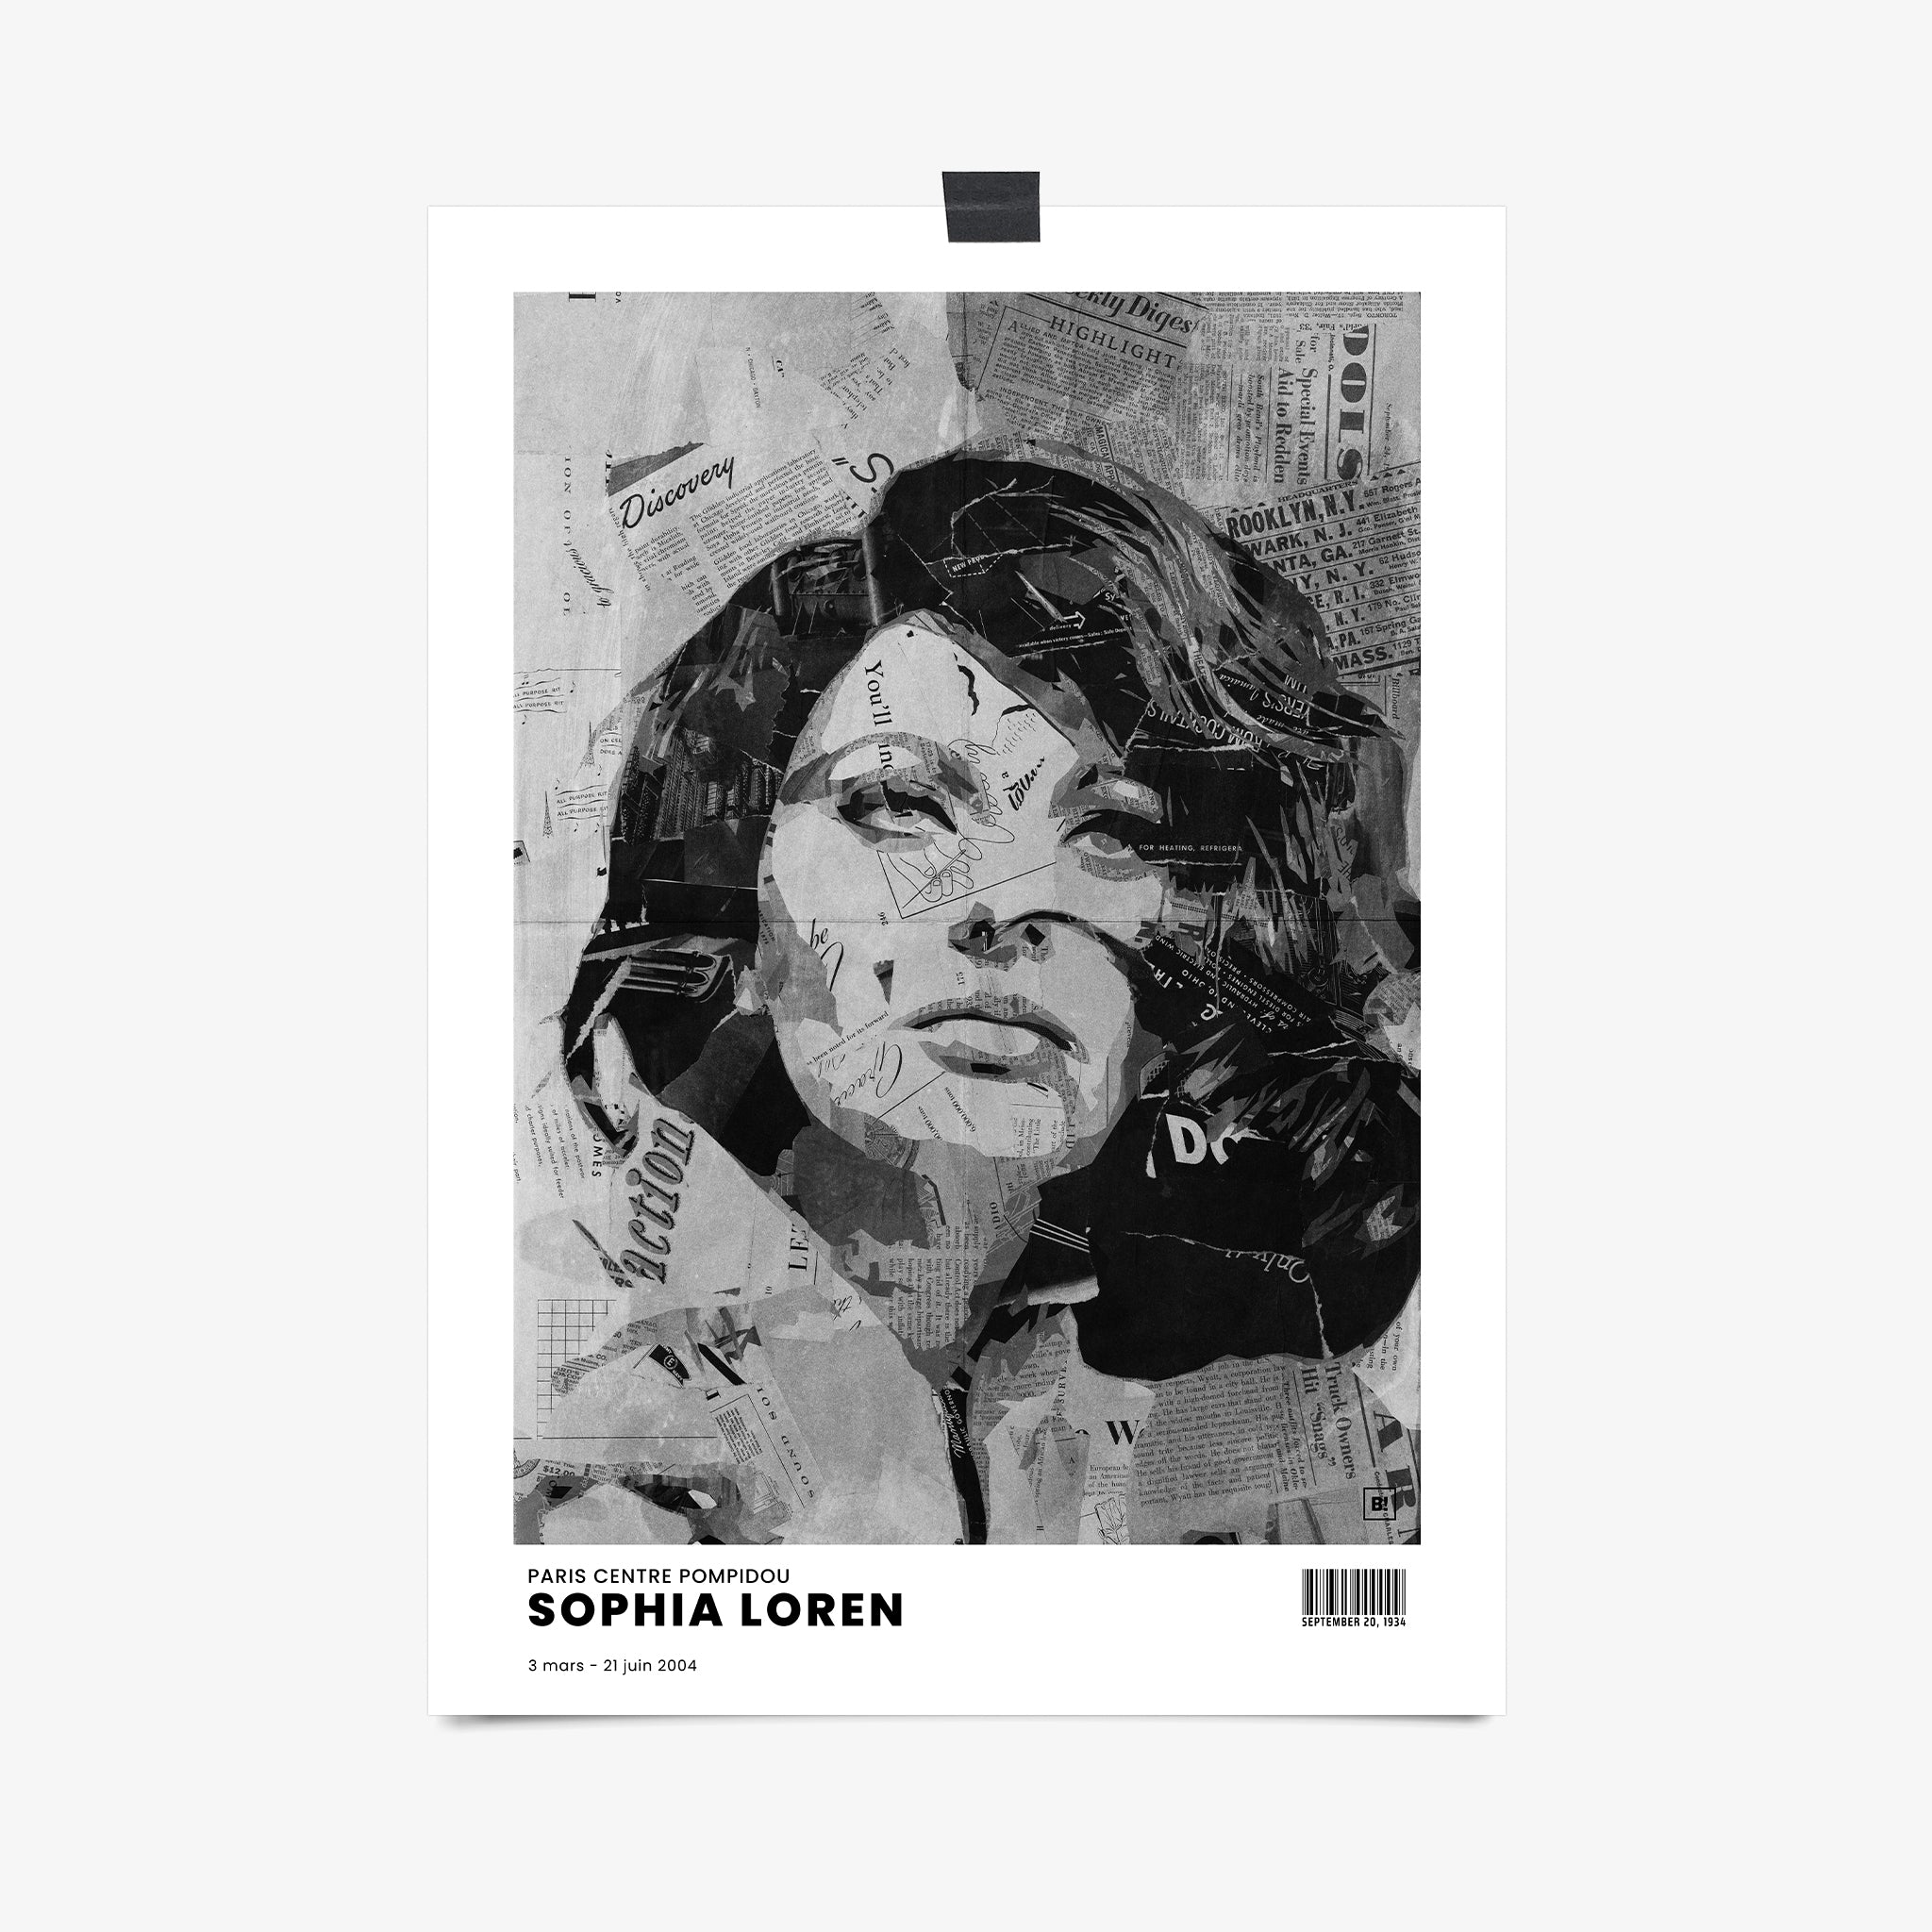 Be inspired by Iconic Sophia Loren Paris Centre Pompidou Exhibition Art Print. This artwork is printed using giclée on archival acid-free paper, capturing its timeless beauty in every detail.